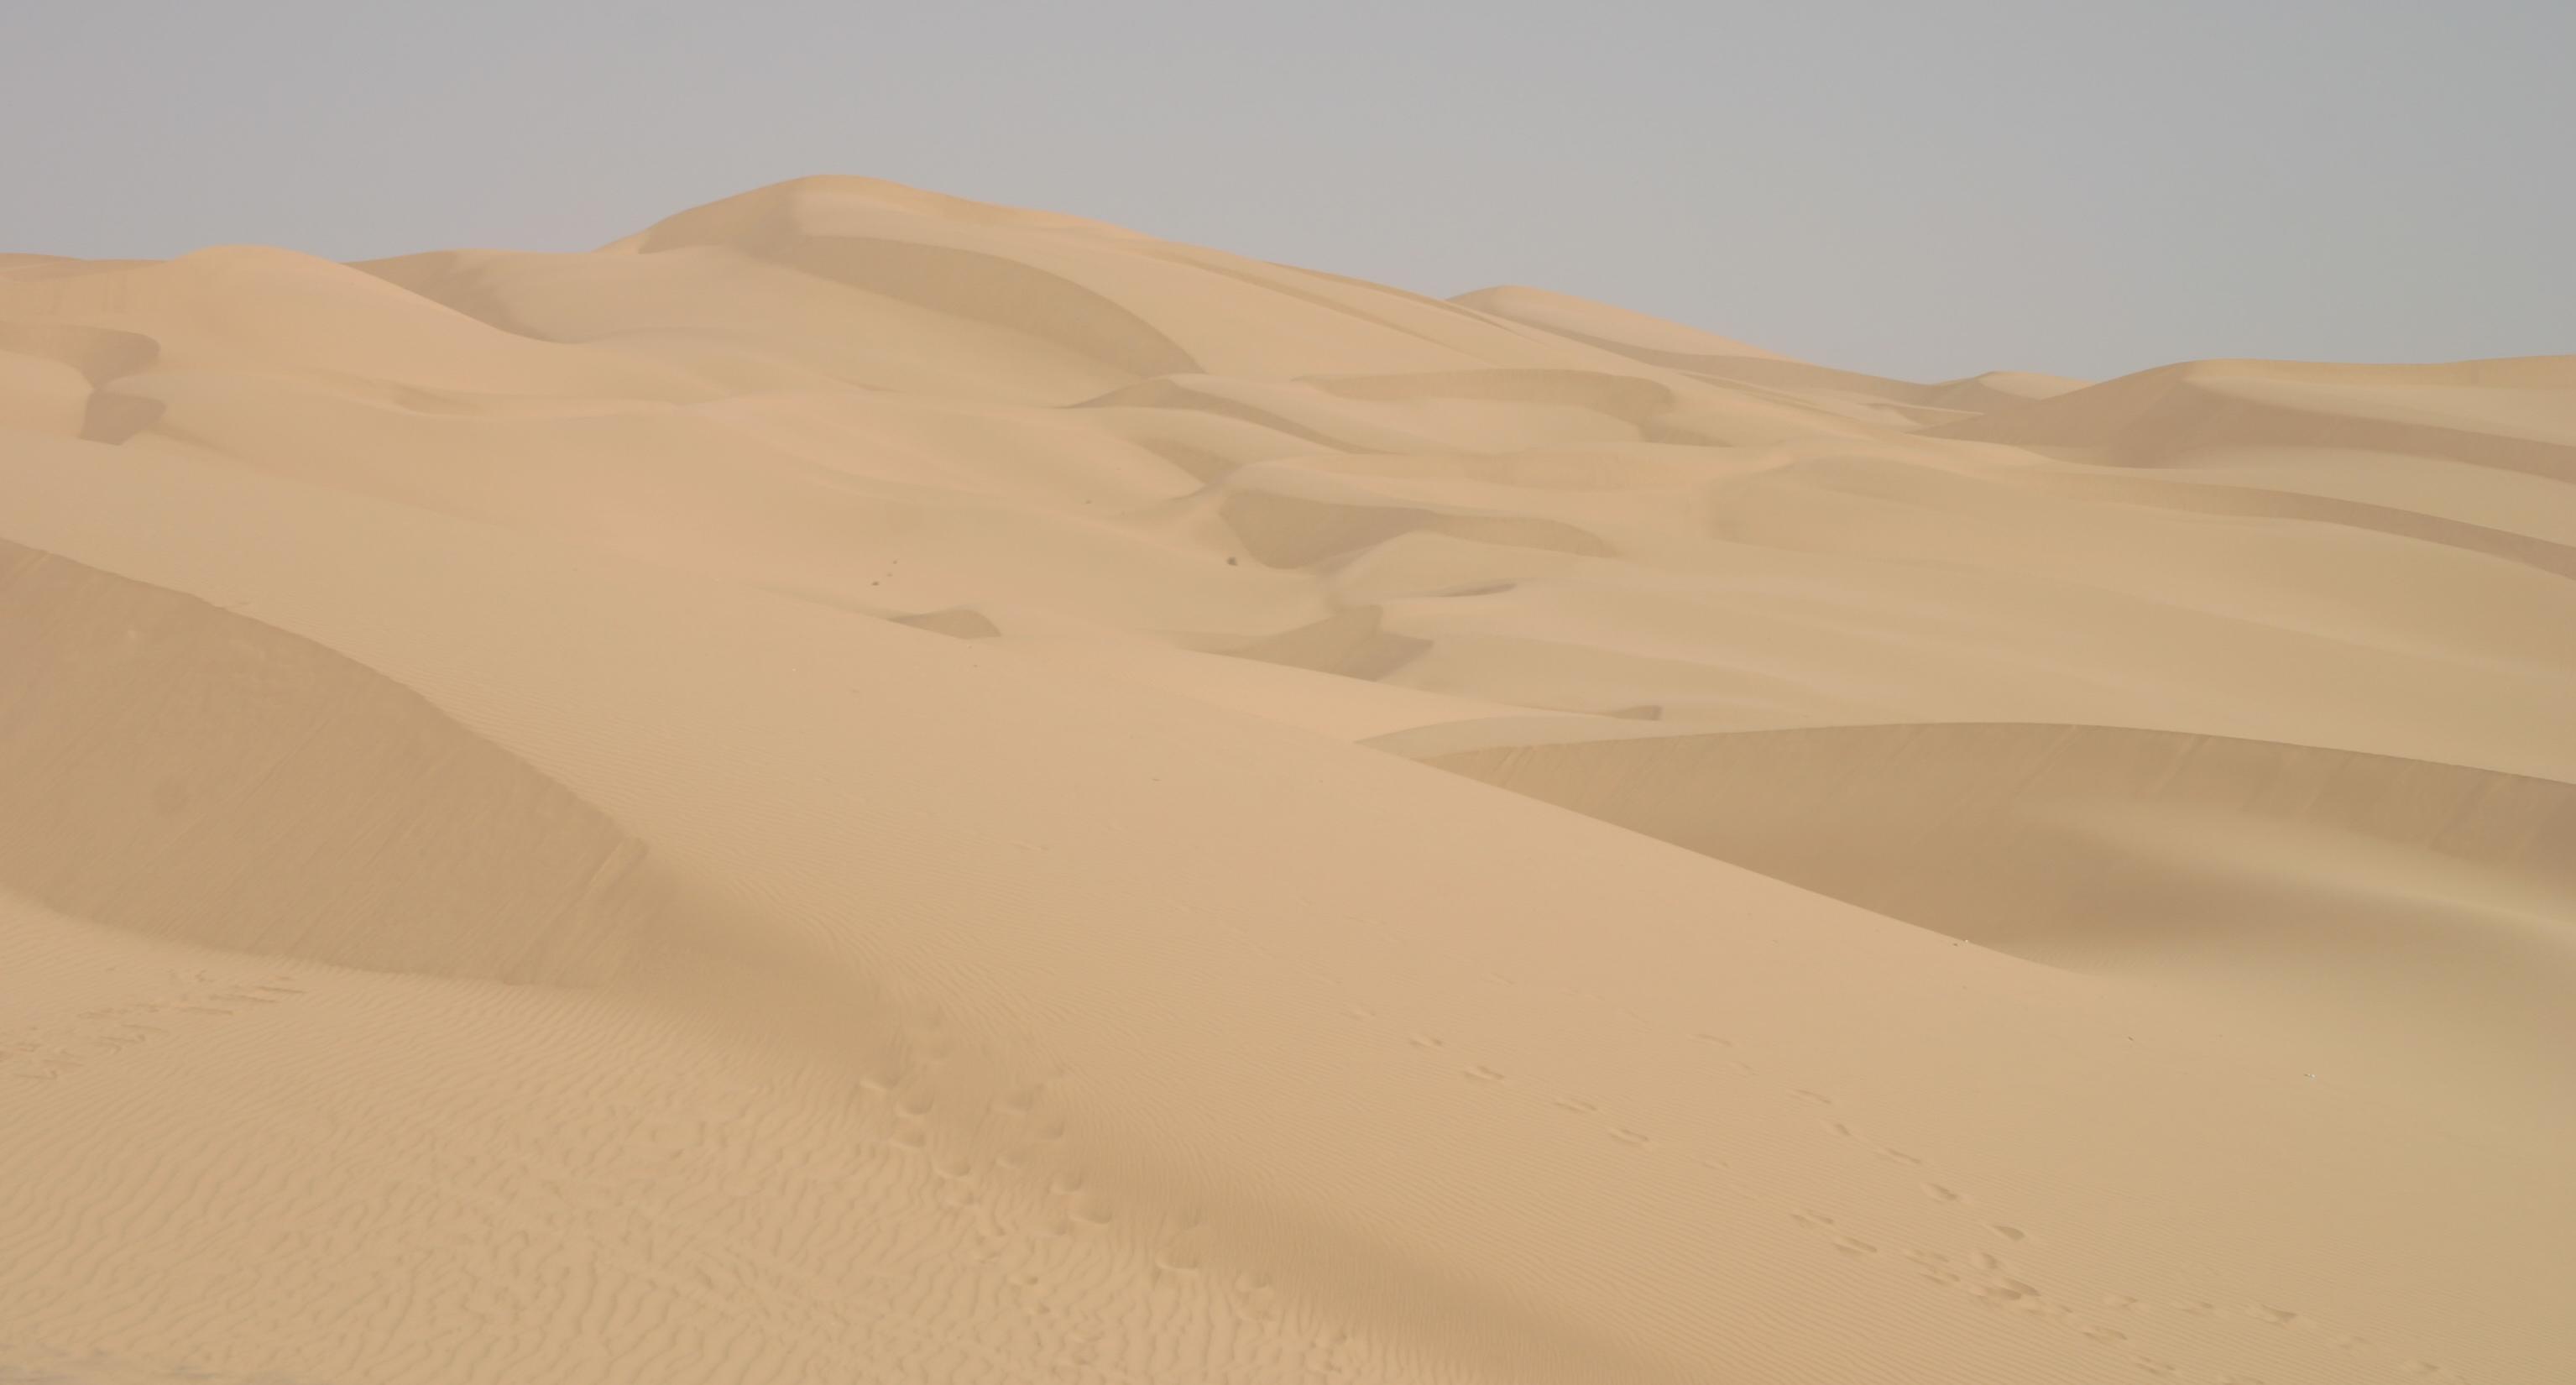 File:Imperial sand dunes.jpg - Wikipedia